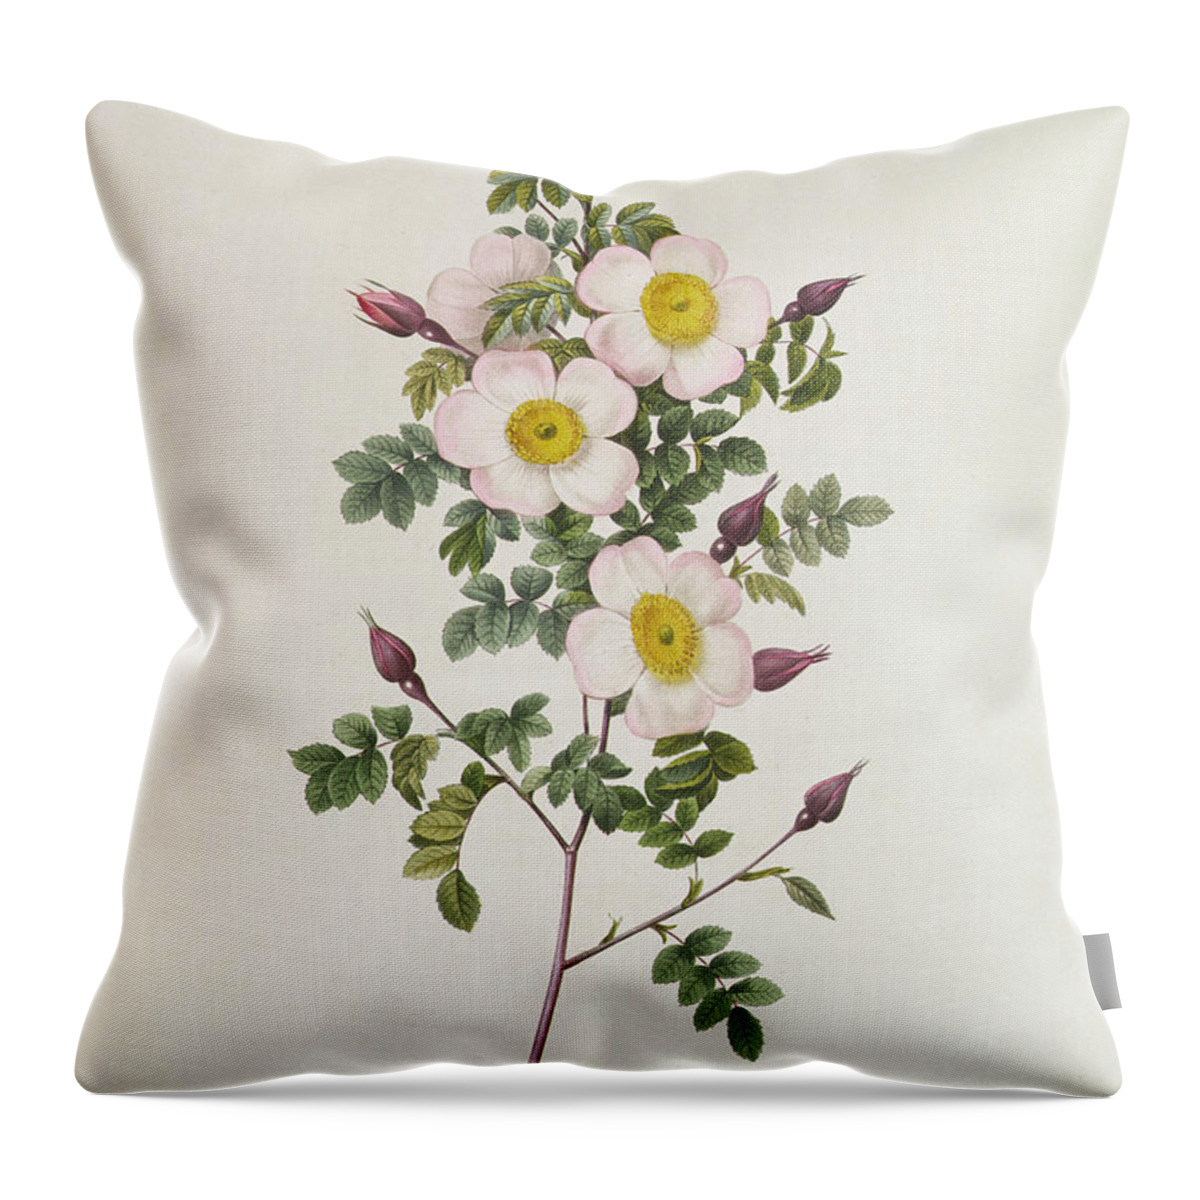 Rosa Throw Pillow featuring the drawing Rosa Pimpinelli Folia Inermis by Pierre Joseph Redoute